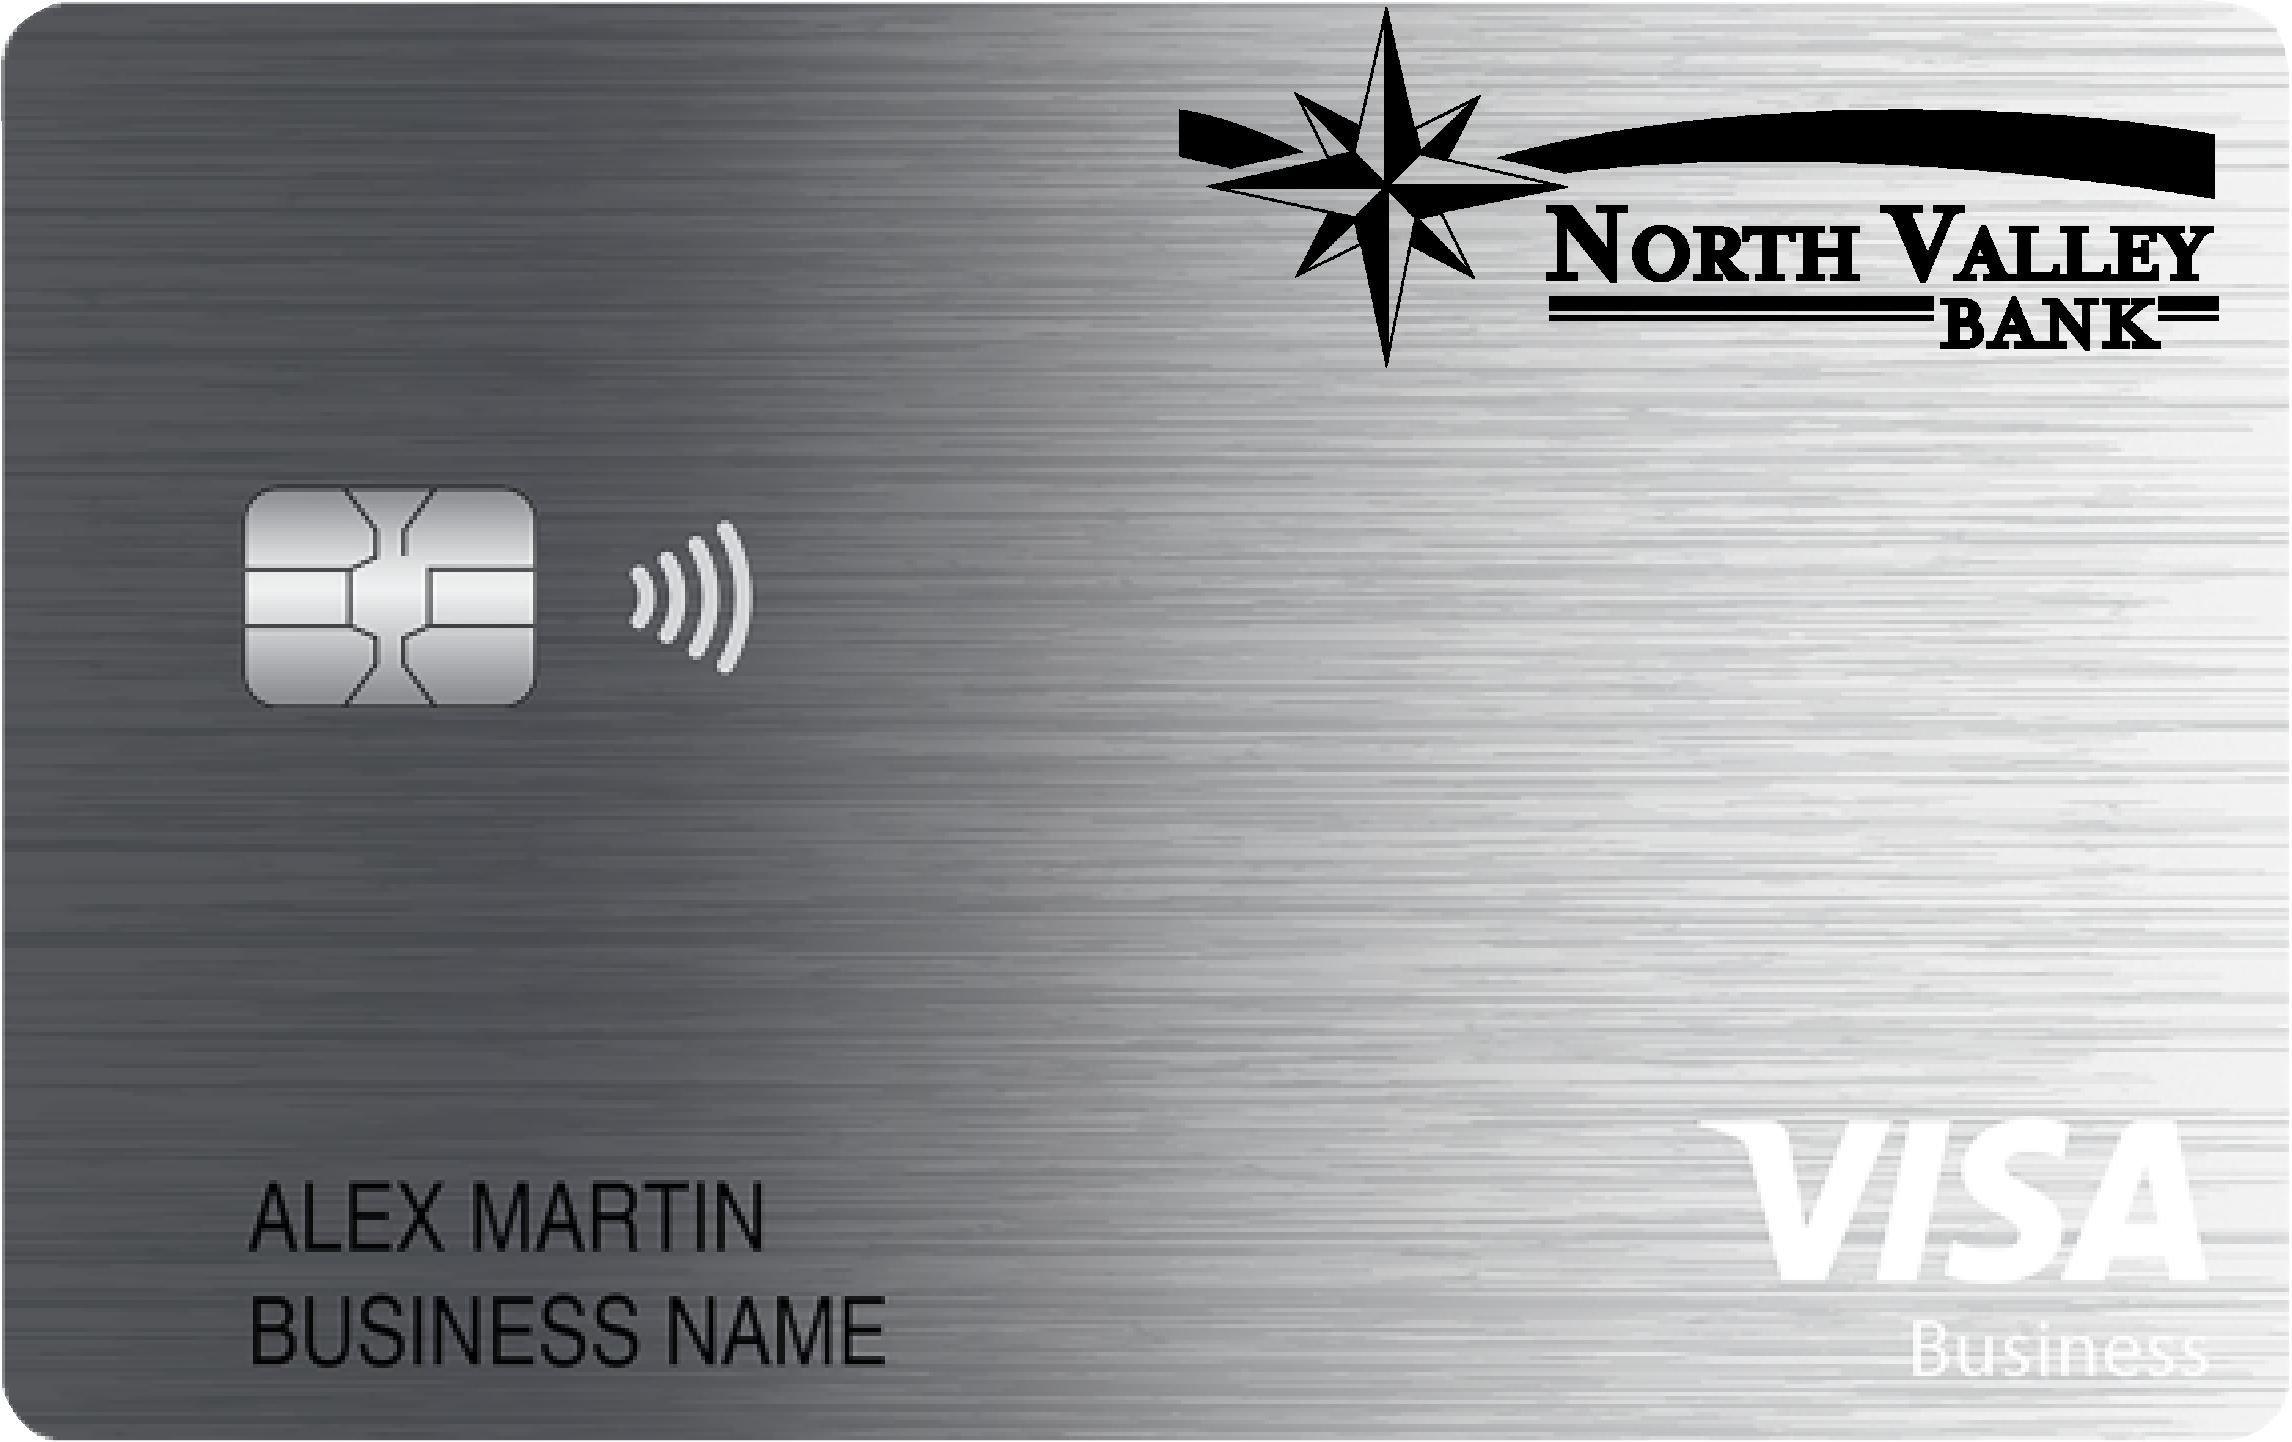 North Valley Bank Business Cash Preferred Card